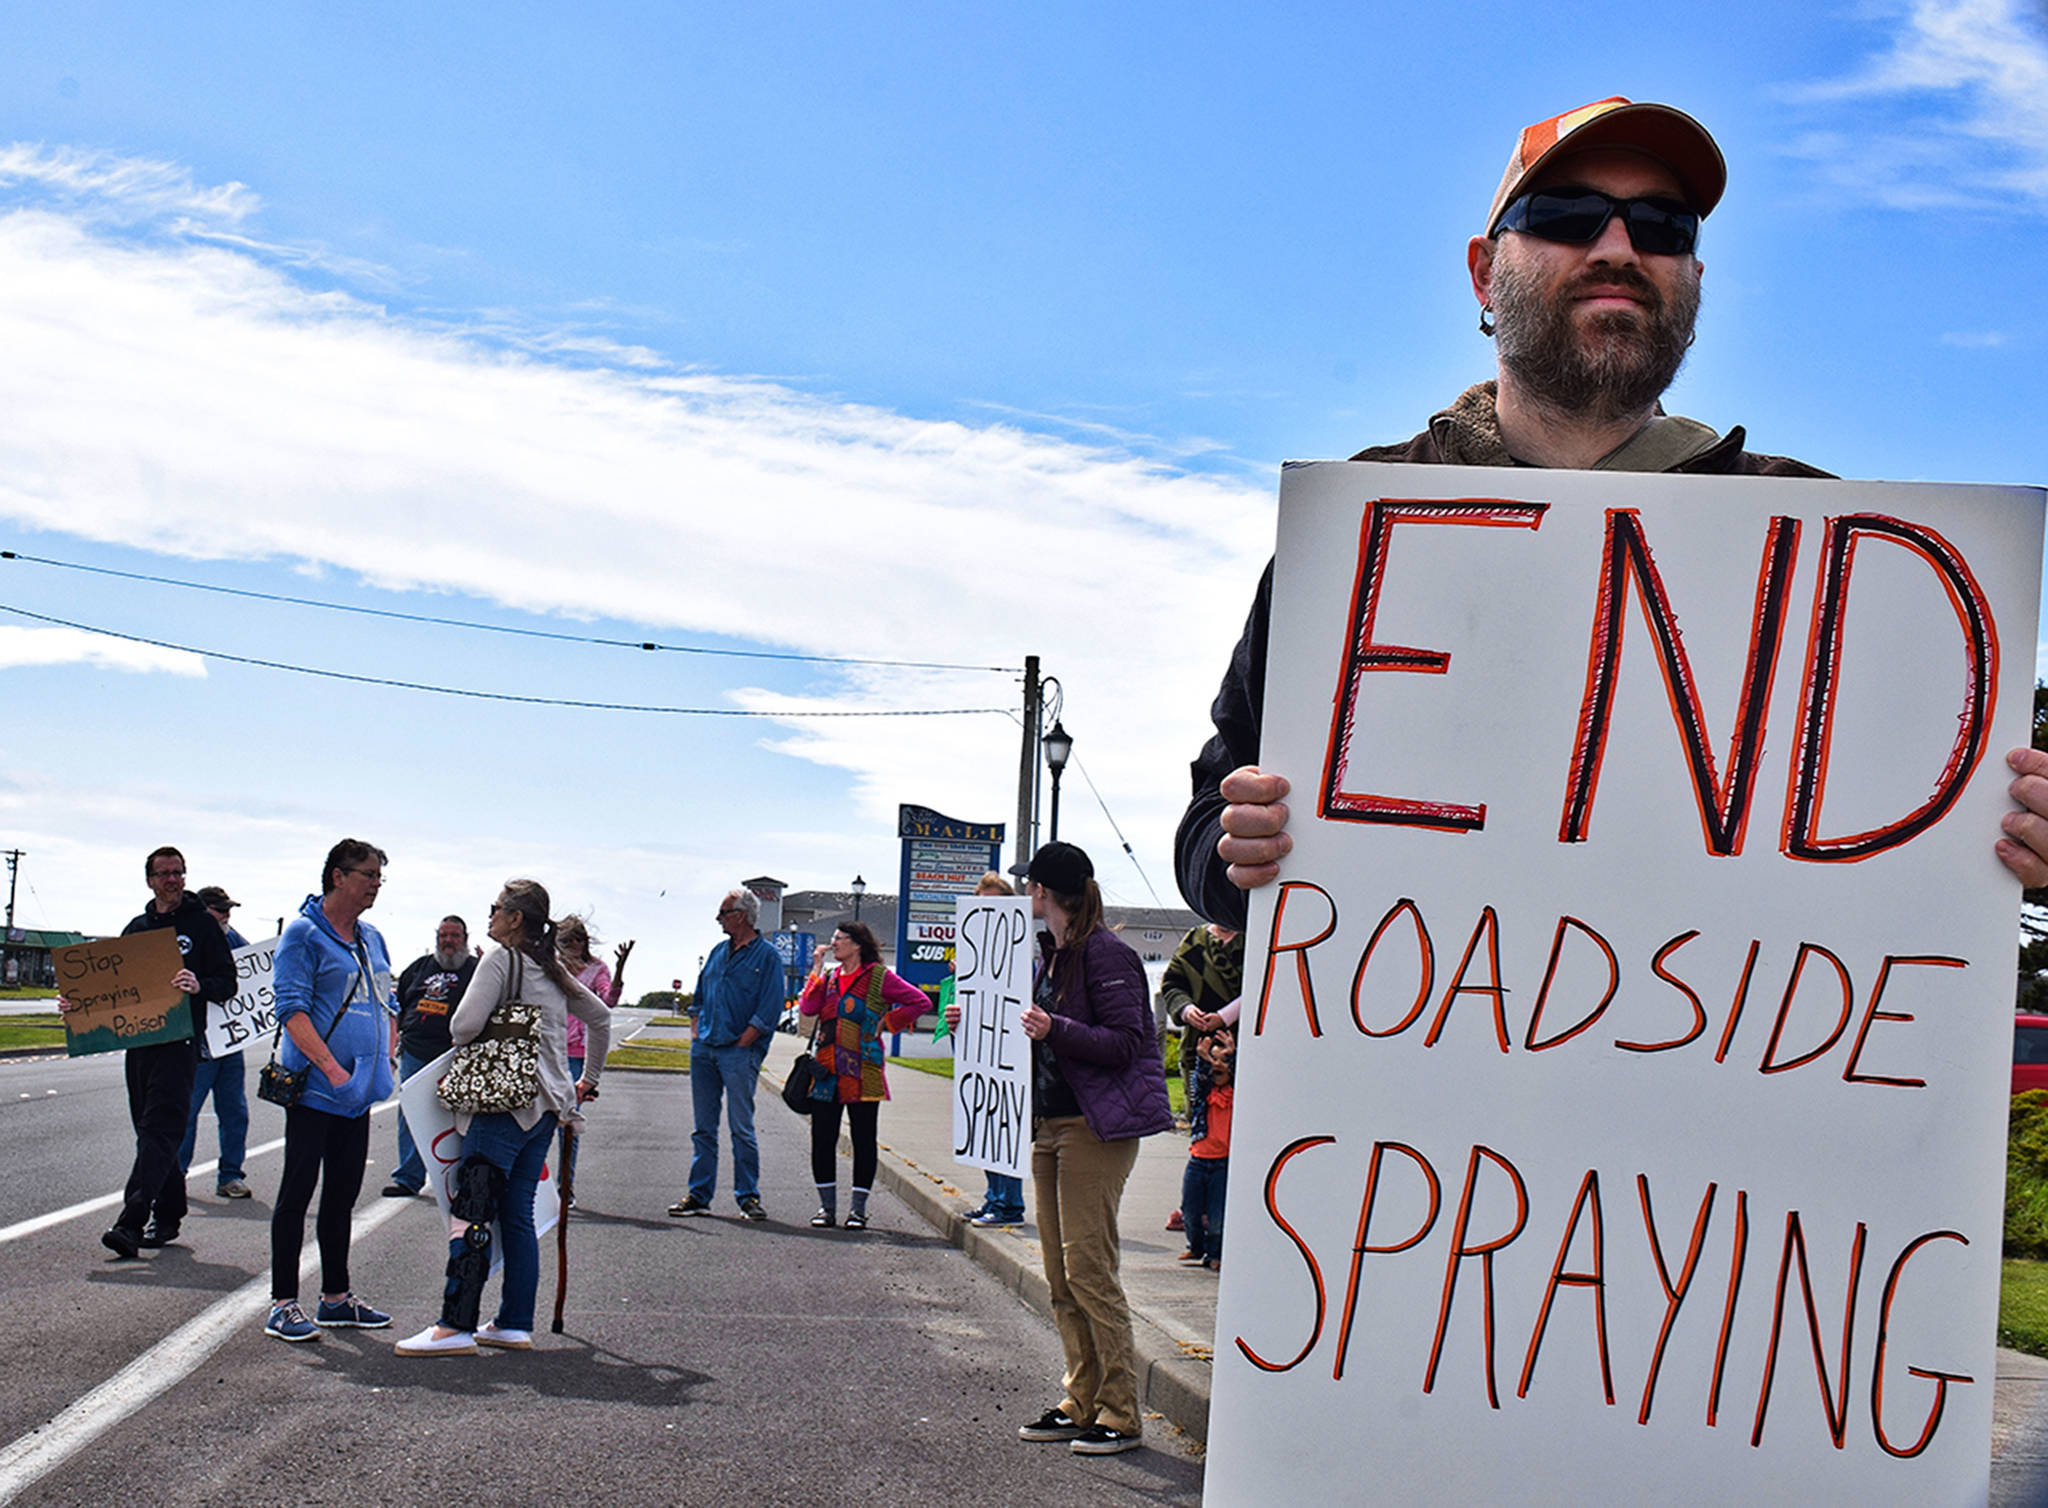 photos by Scott Johnson | Grays Harbor News Group                                Ocean Shores resident Matt Cyphert was among about 15 who gathered on Chance a la Mer Blvd. in front of the Convention Center last week to protest the roadside weed spraying in the city.